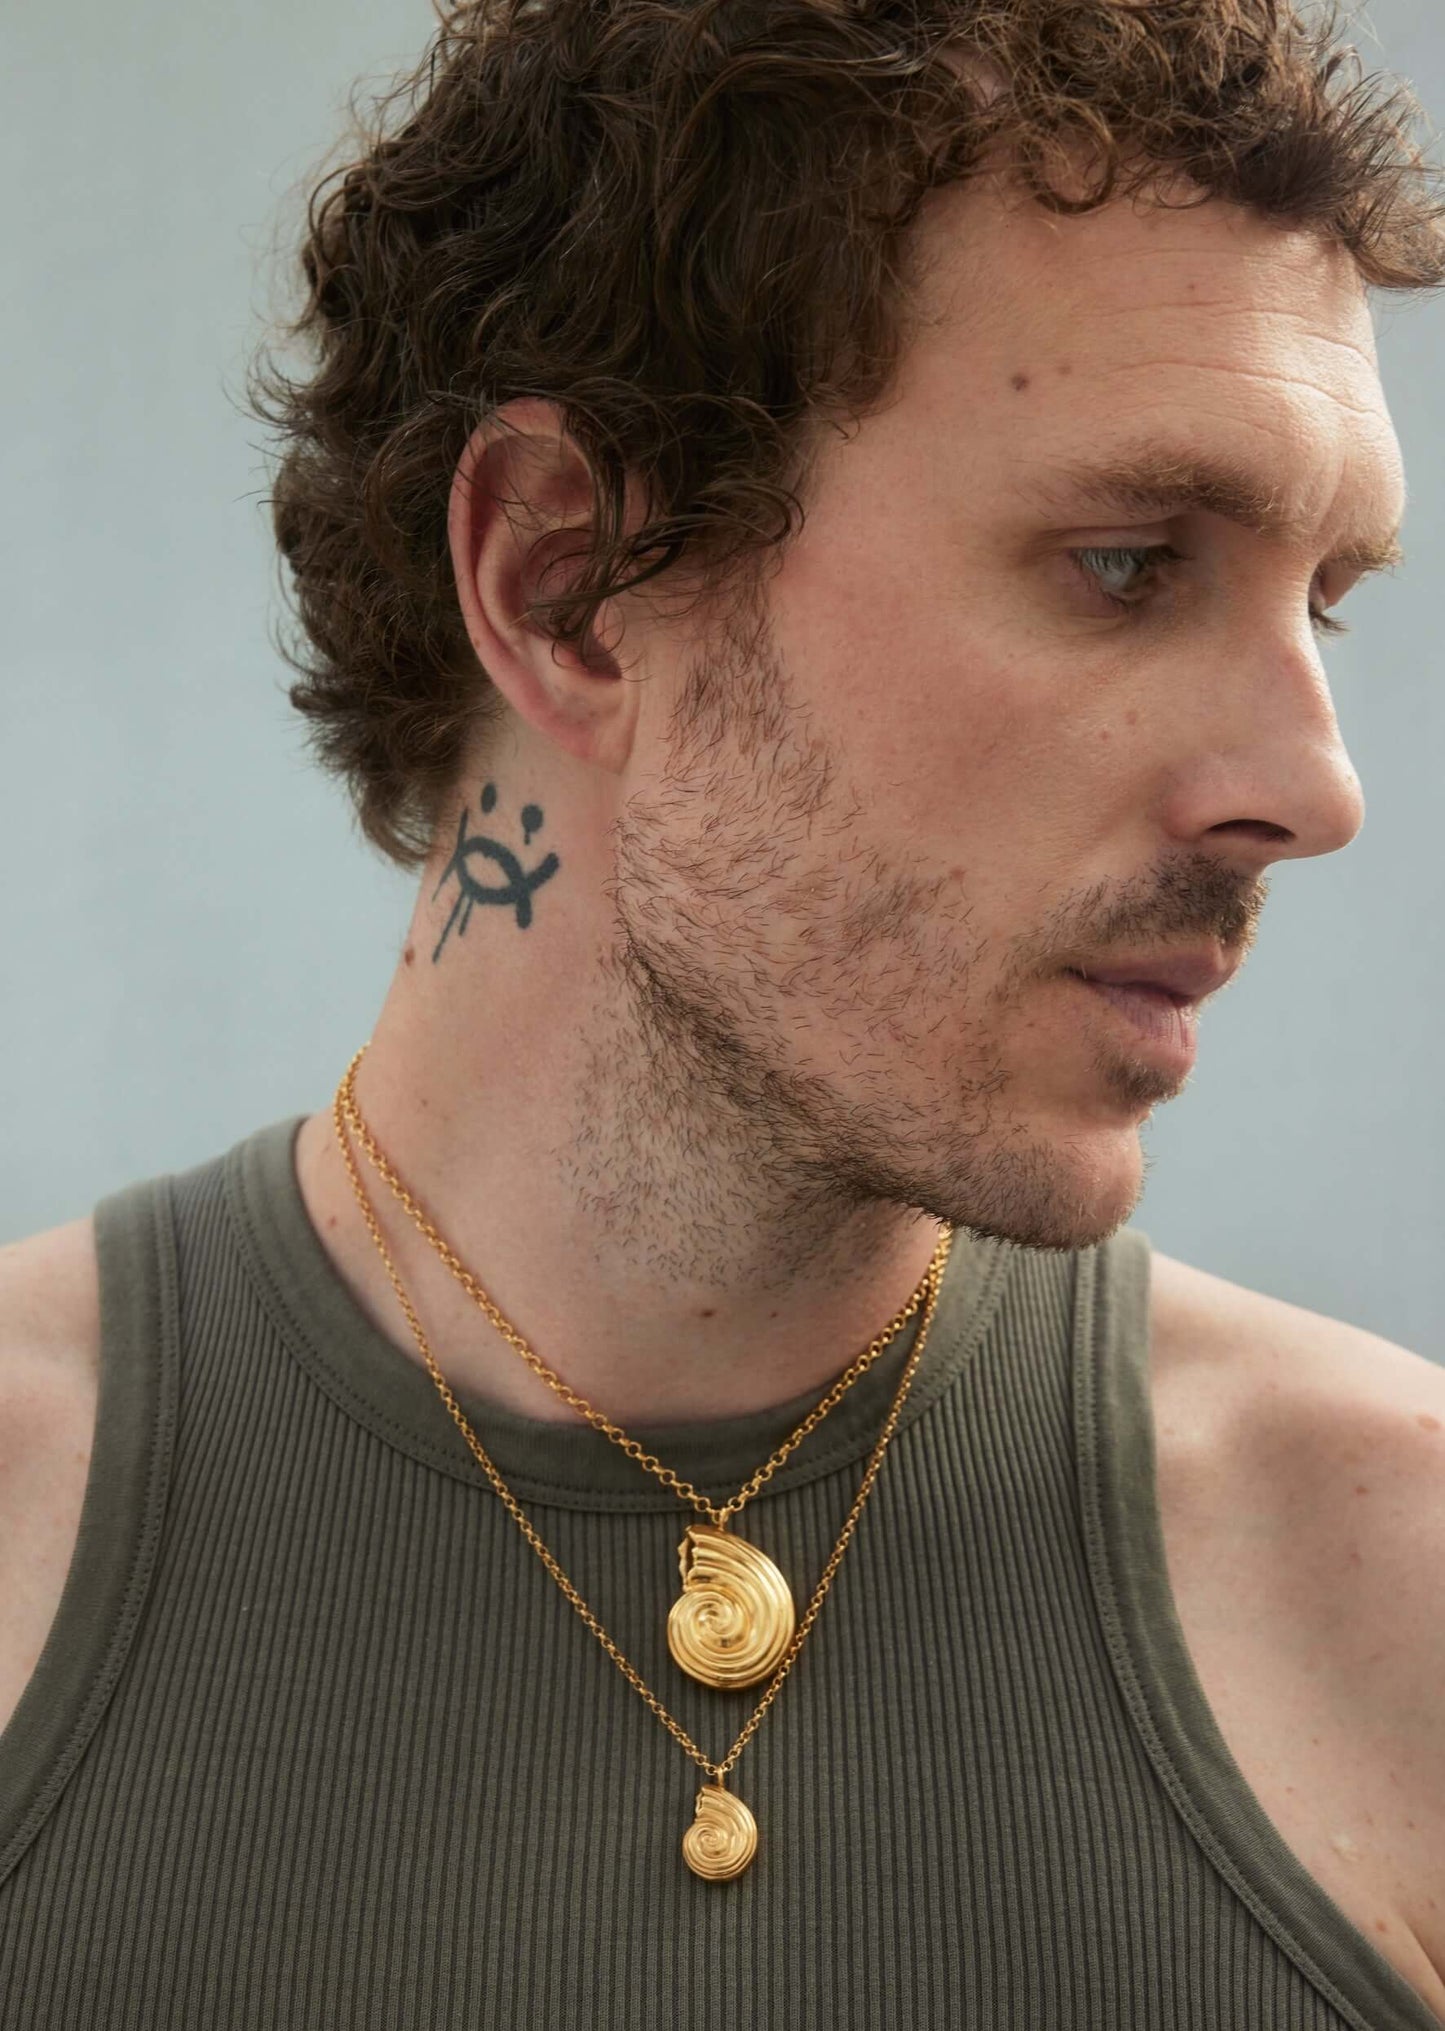 Male model with neck tattoo and gold necklaces